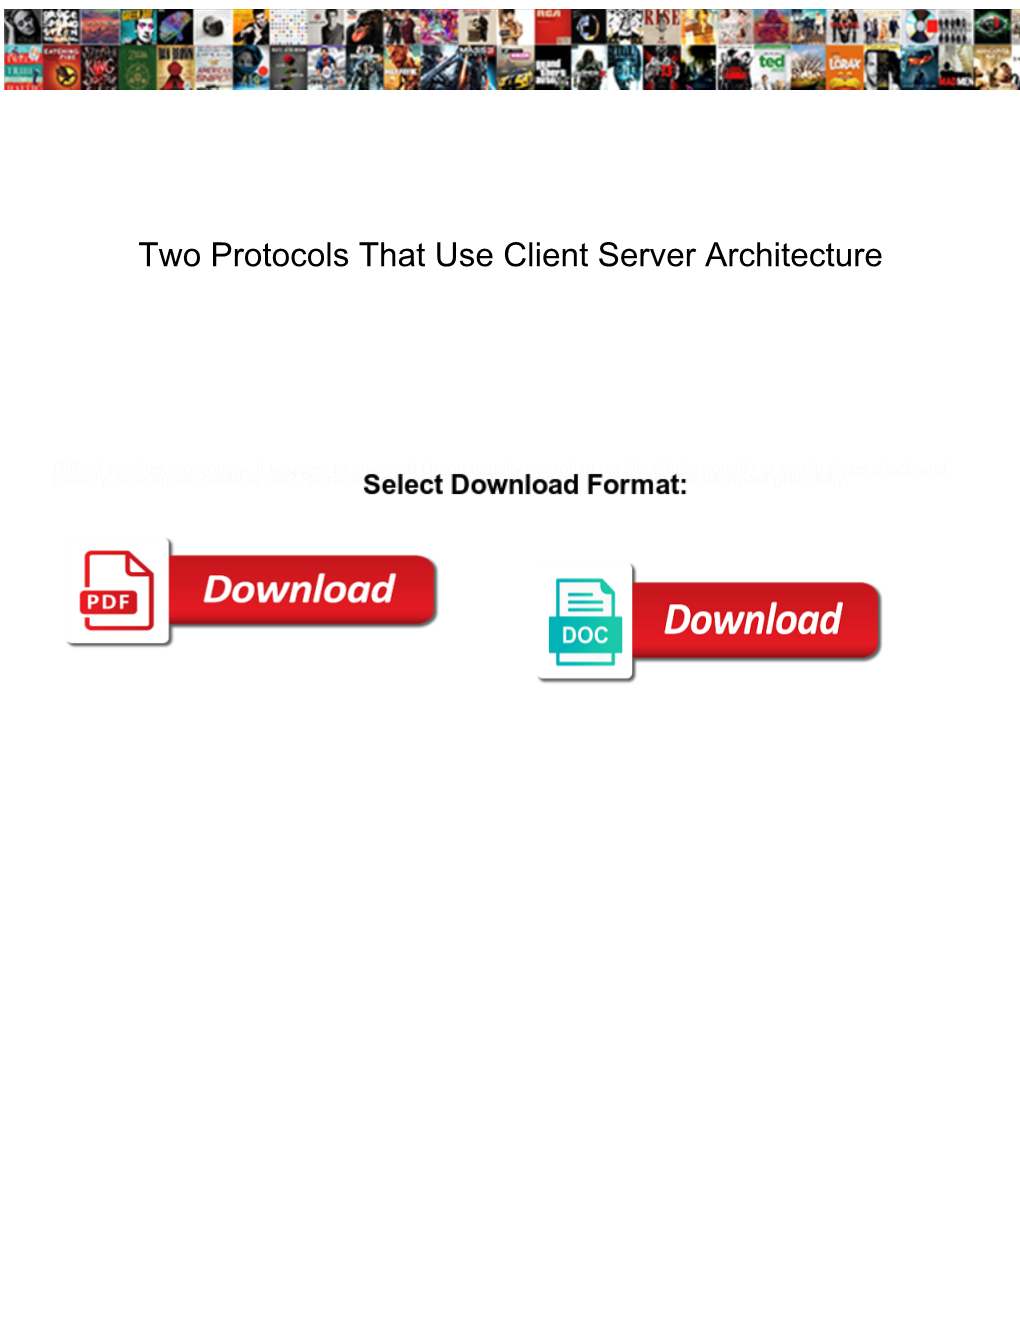 Two Protocols That Use Client Server Architecture